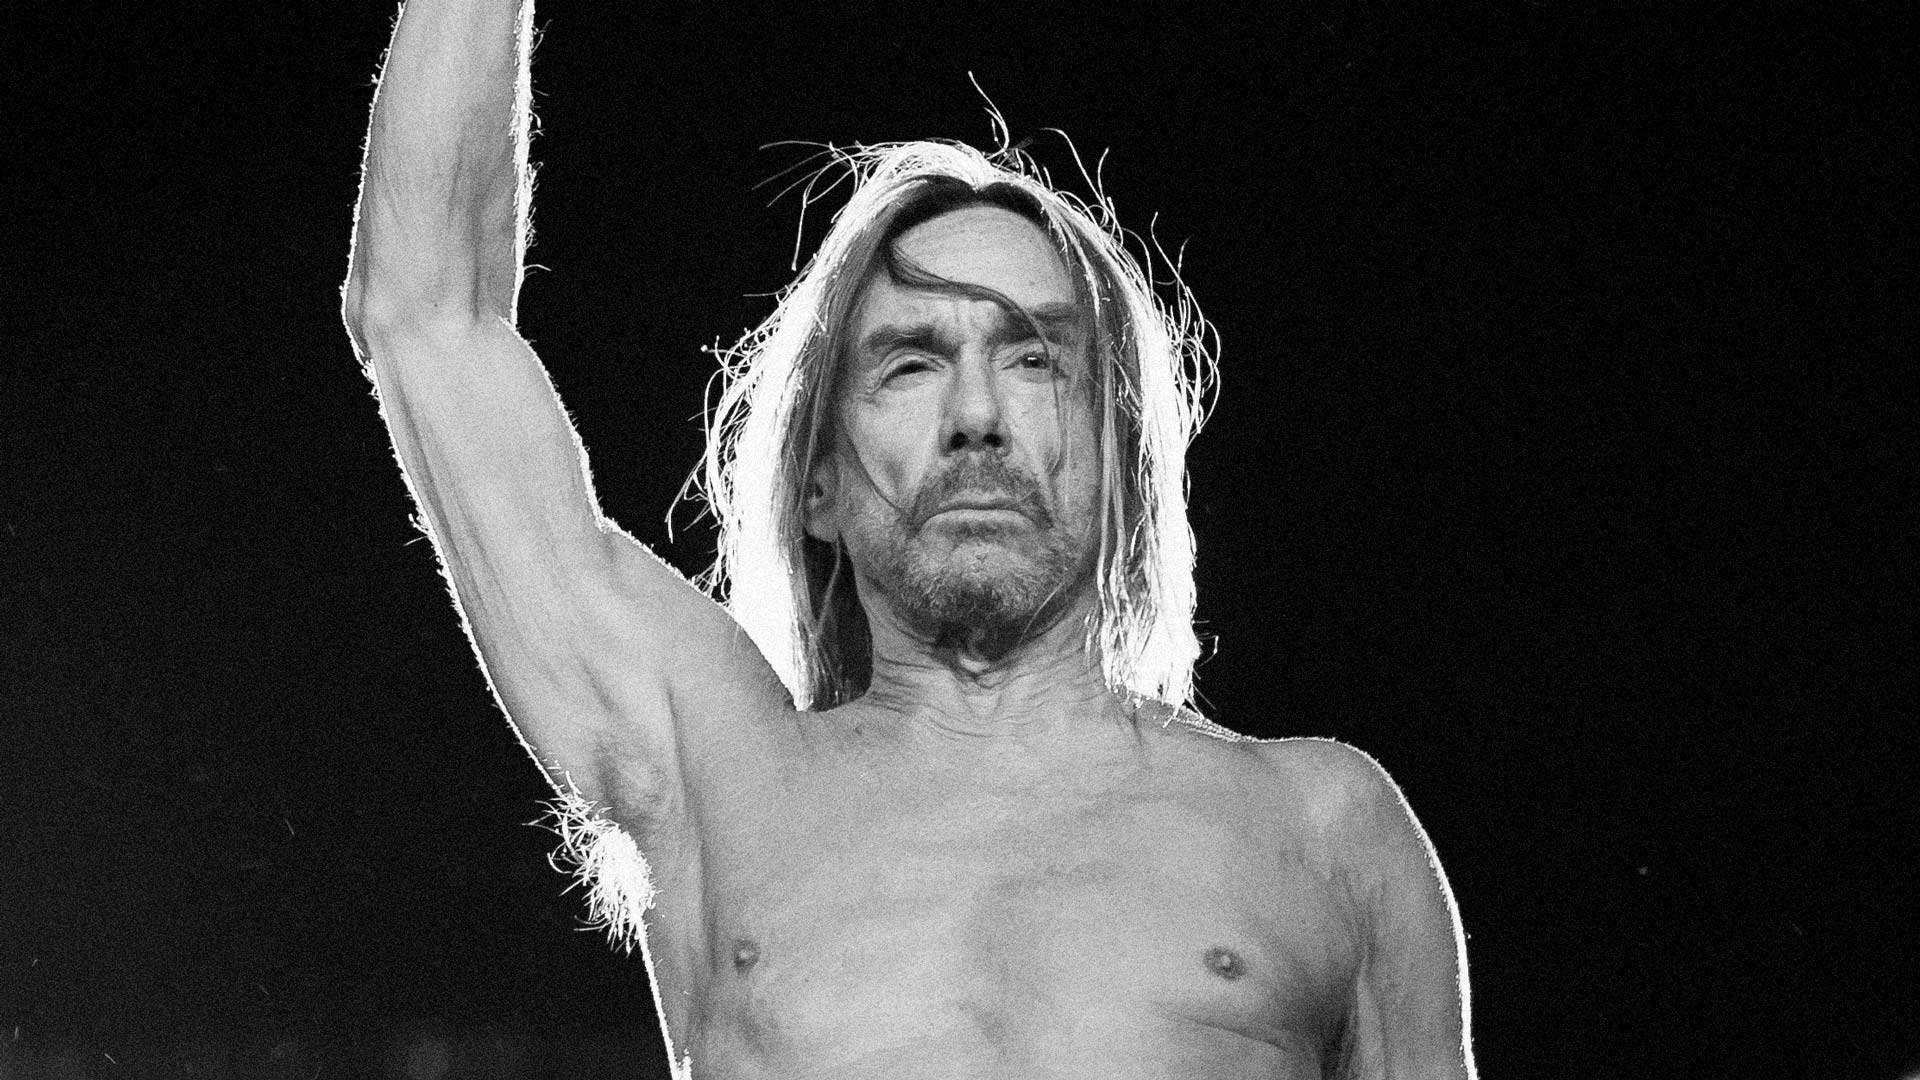 The 'Godfather of Punk' Iggy Pop Is Coming to Australia